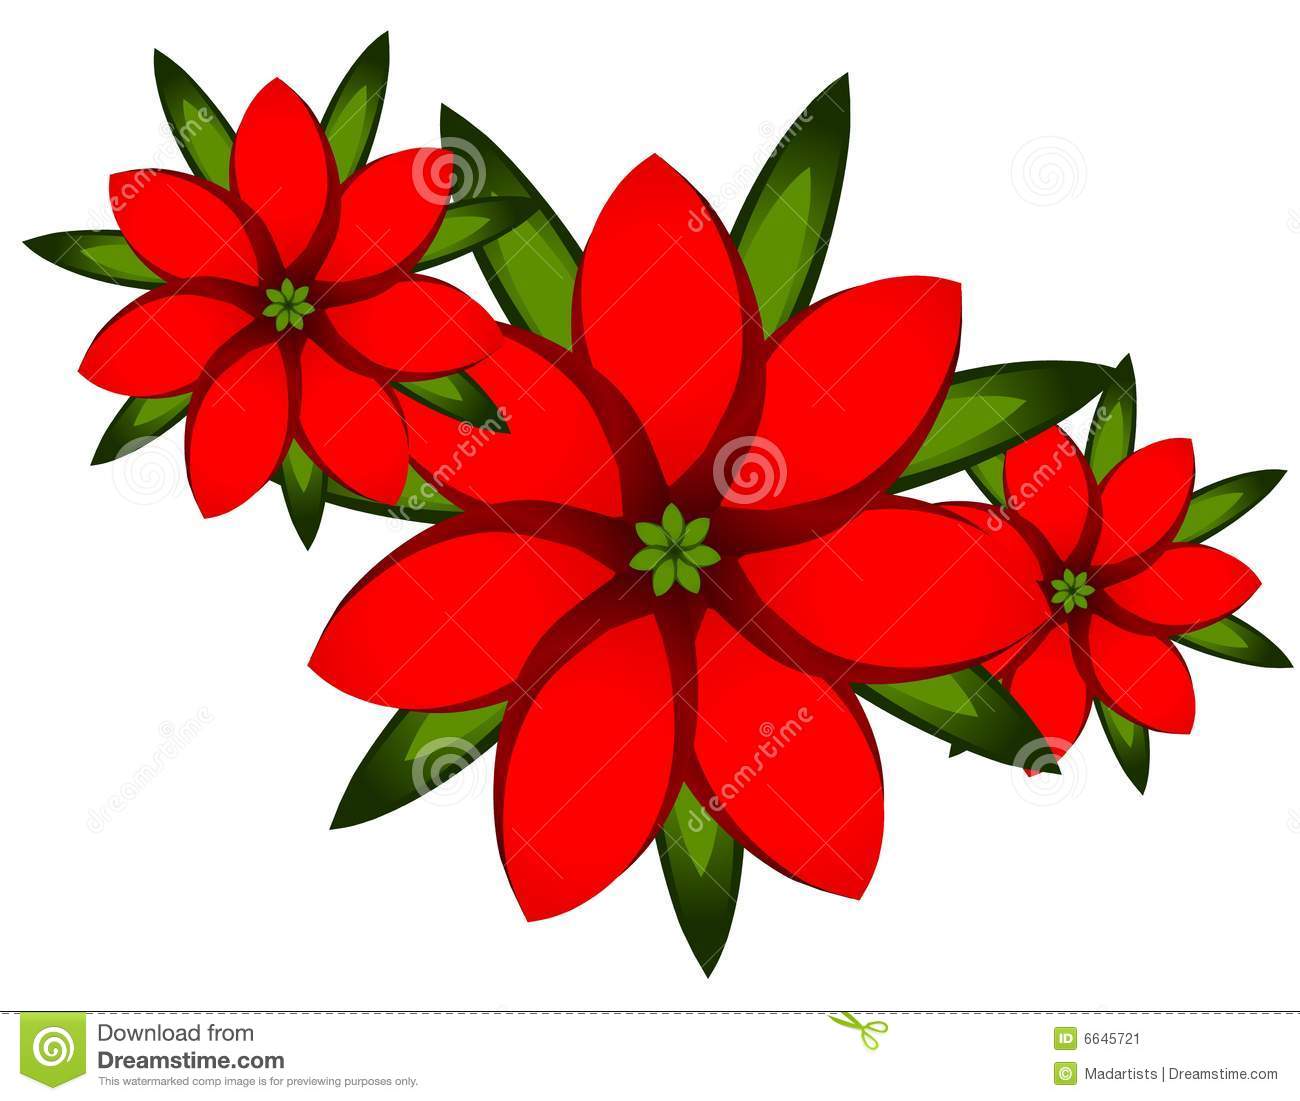 Illustration Featuring A Simple Arrangment Of Red Poinsettia Flowers